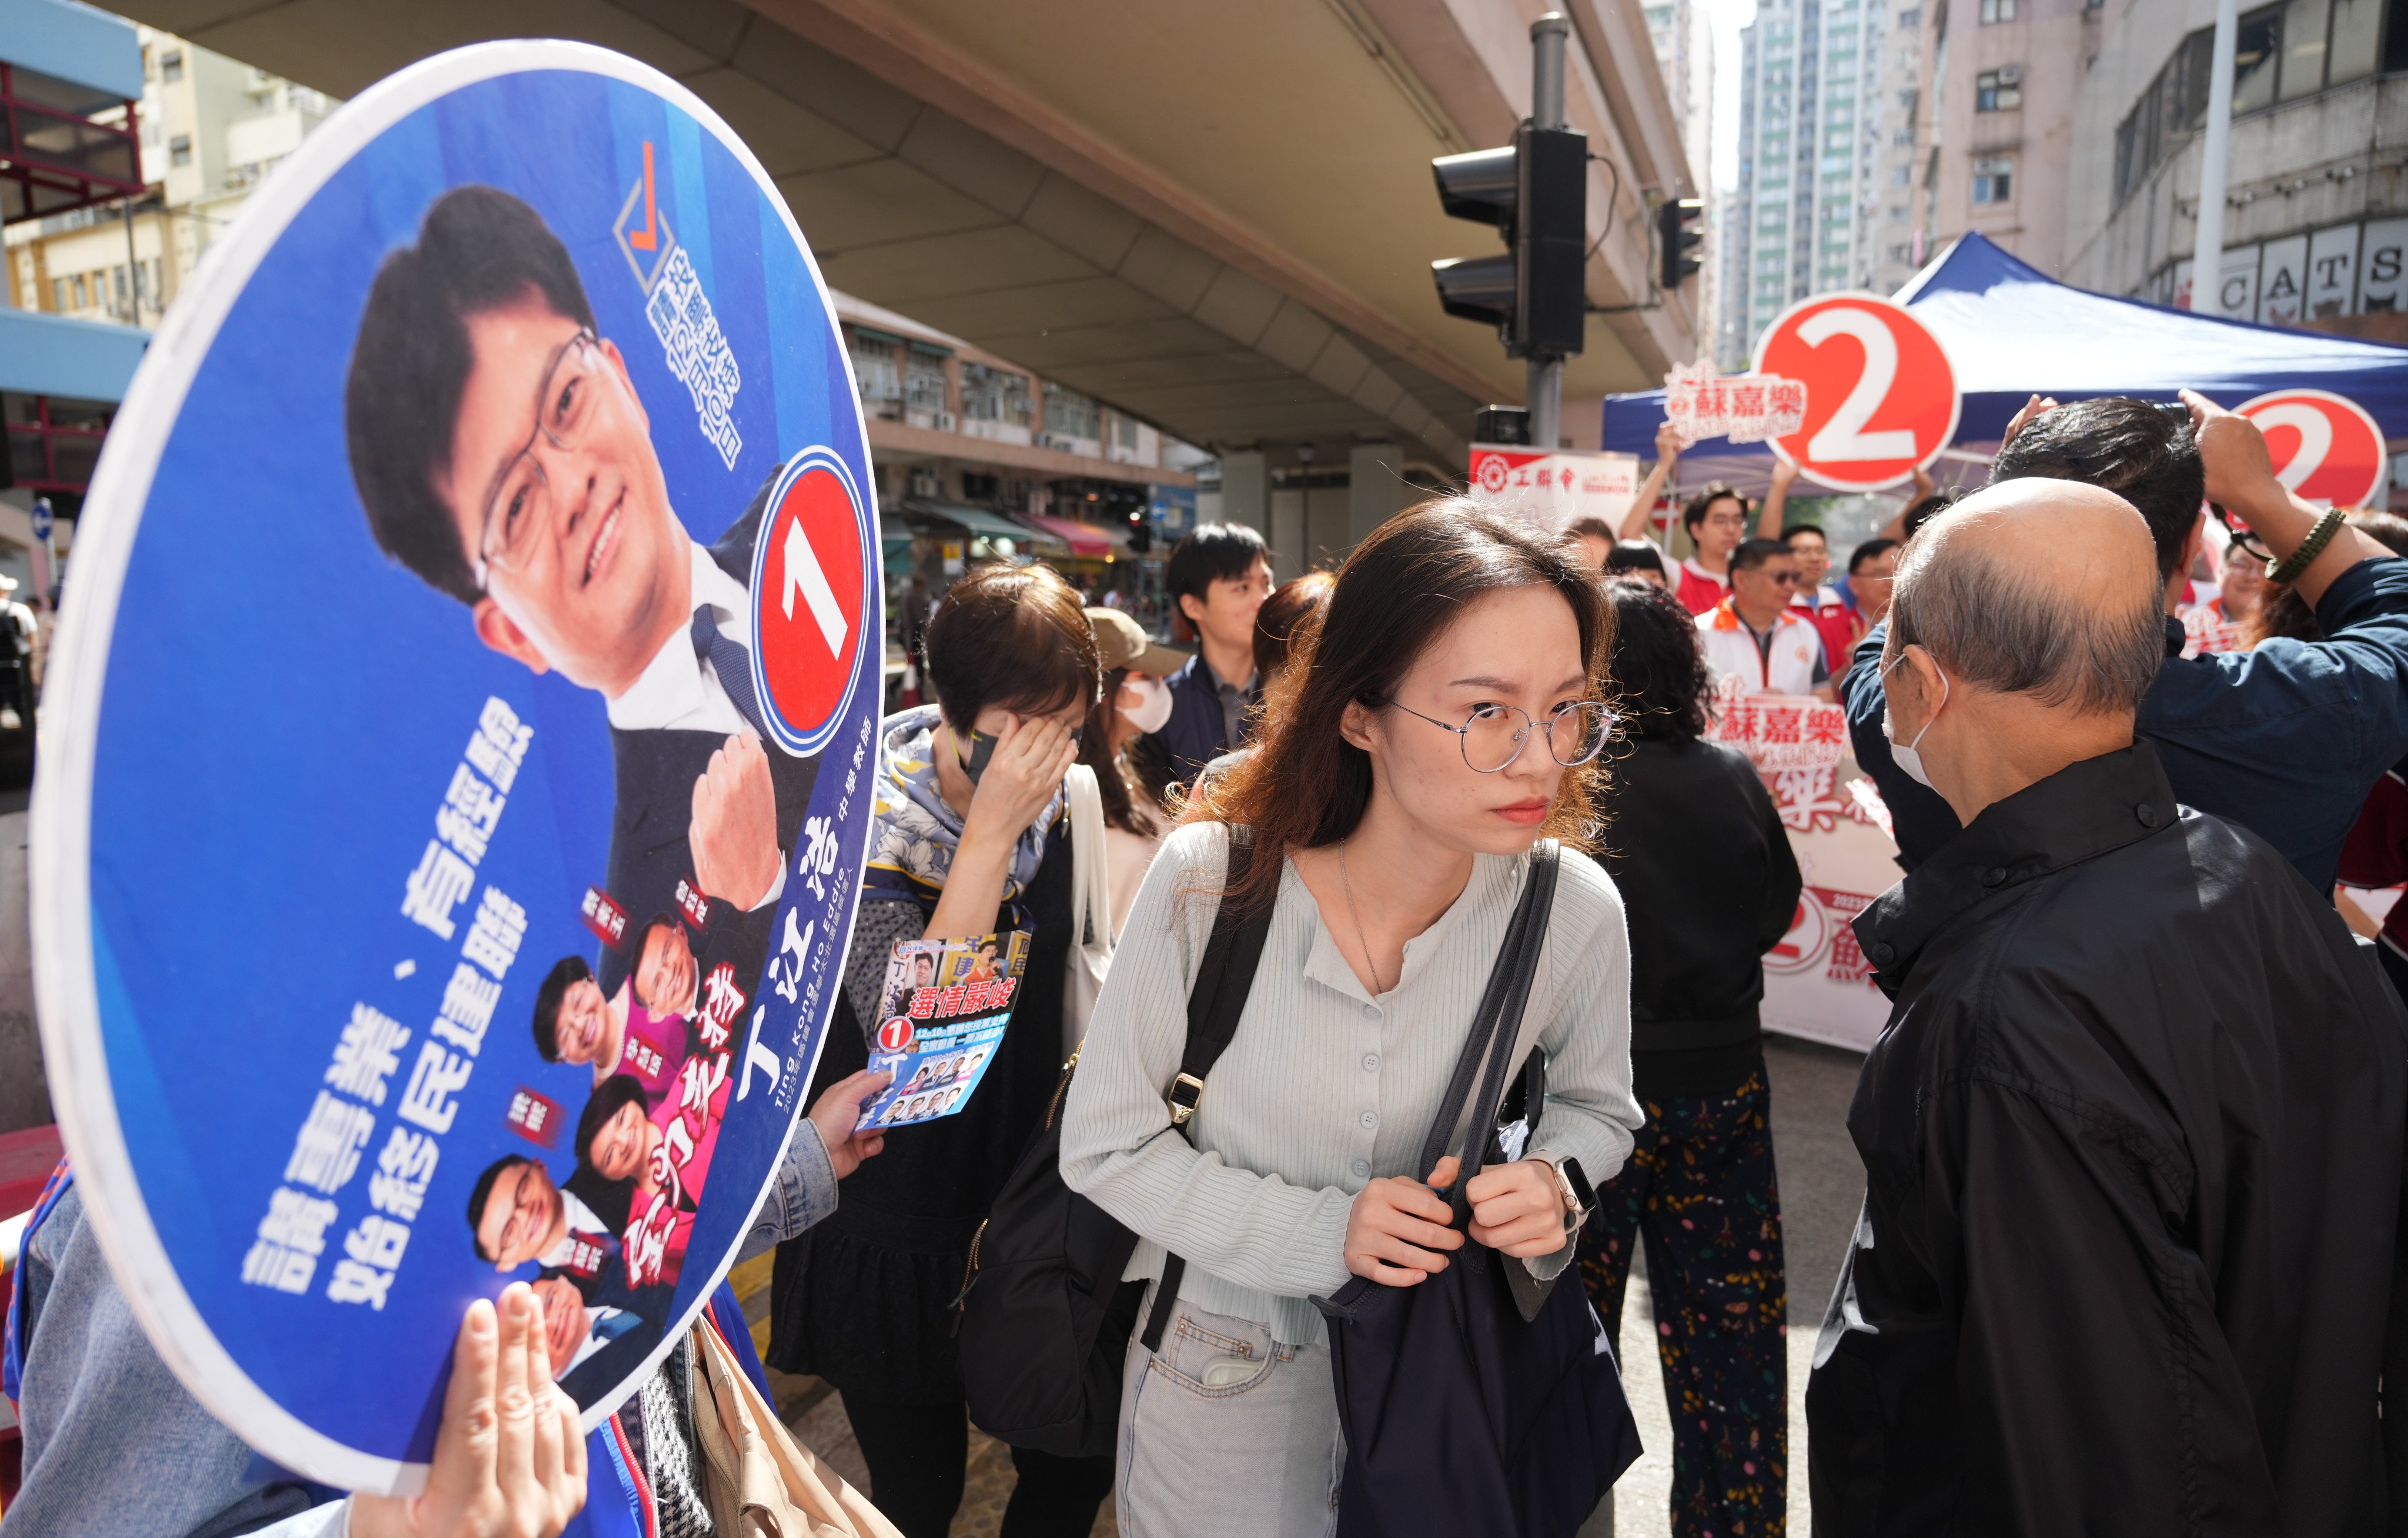 Political parties canvass voters for the district council election at North Point on December 10. Photo: Sam Tsang